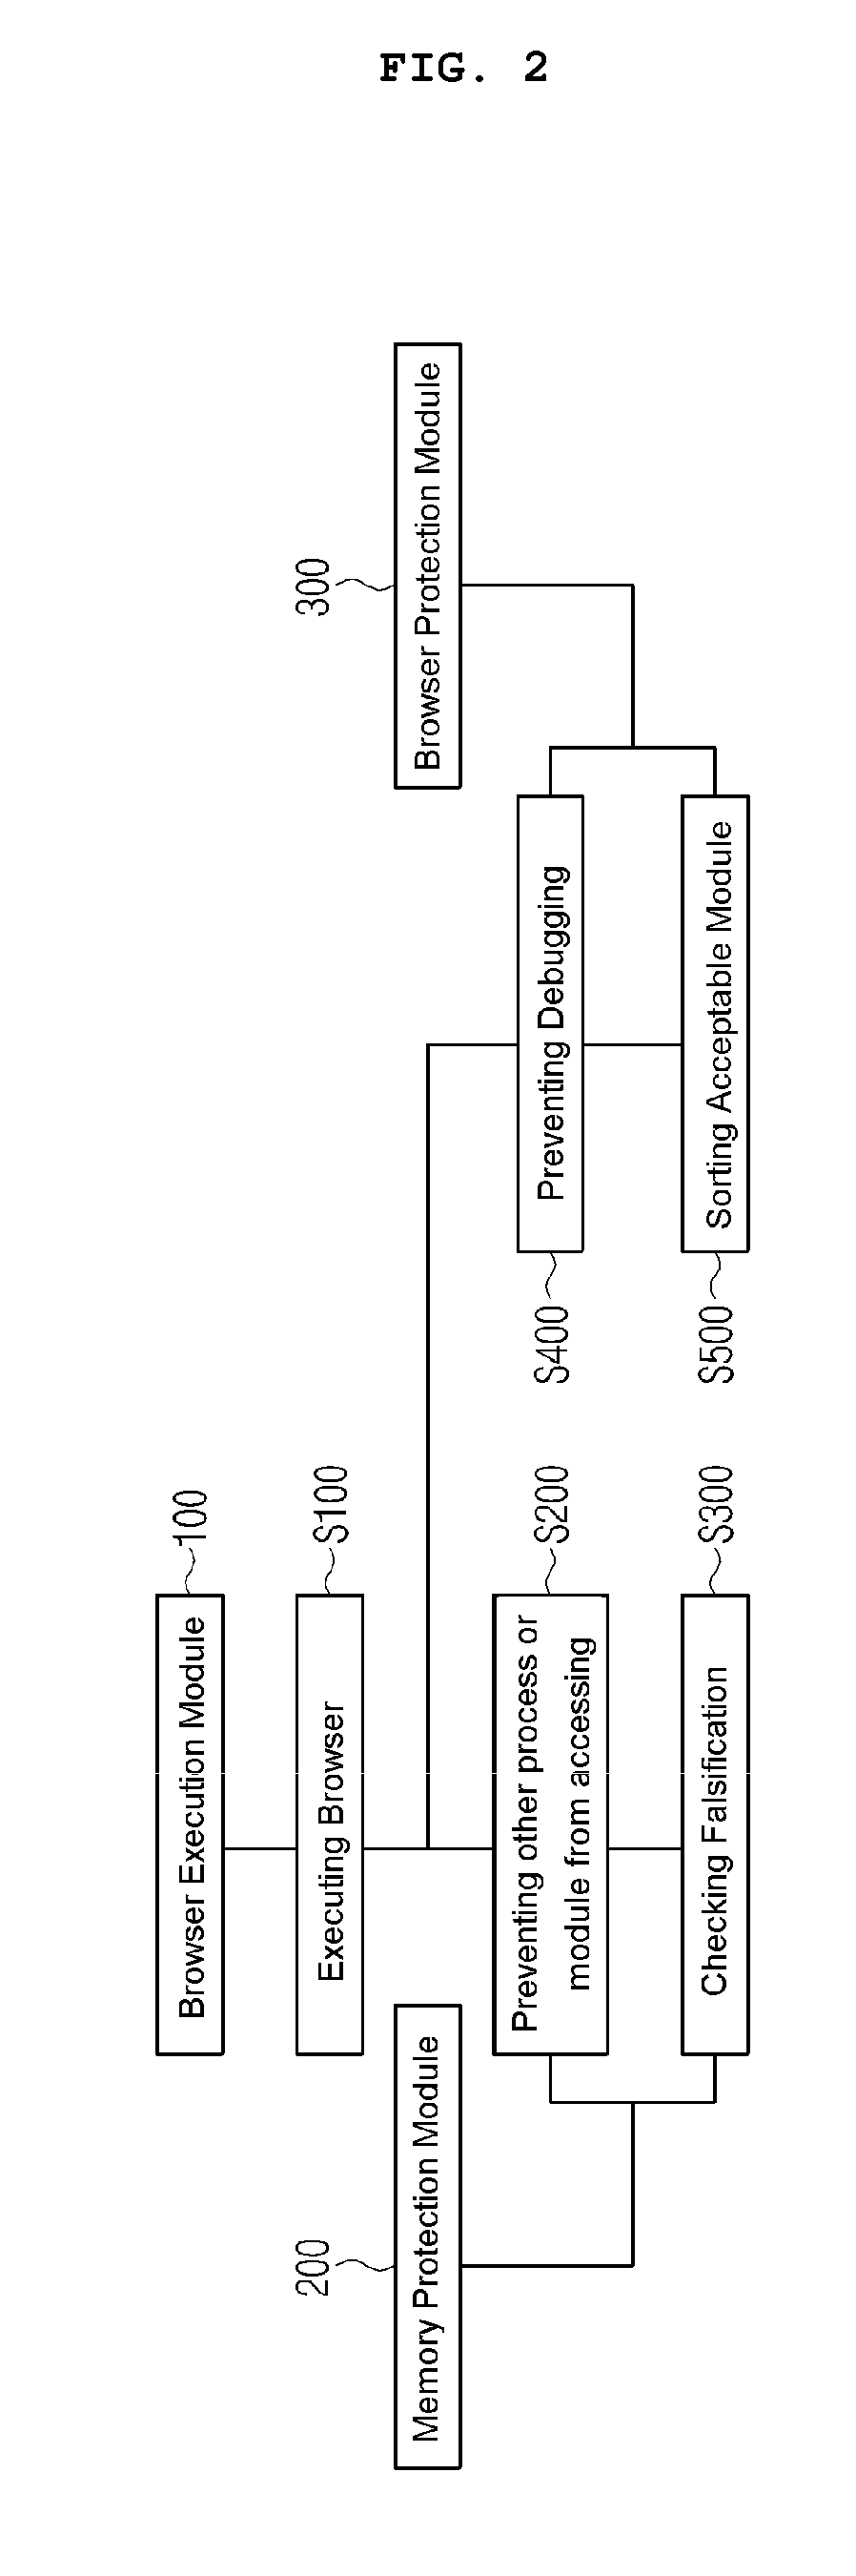 Internet site security system and method thereto